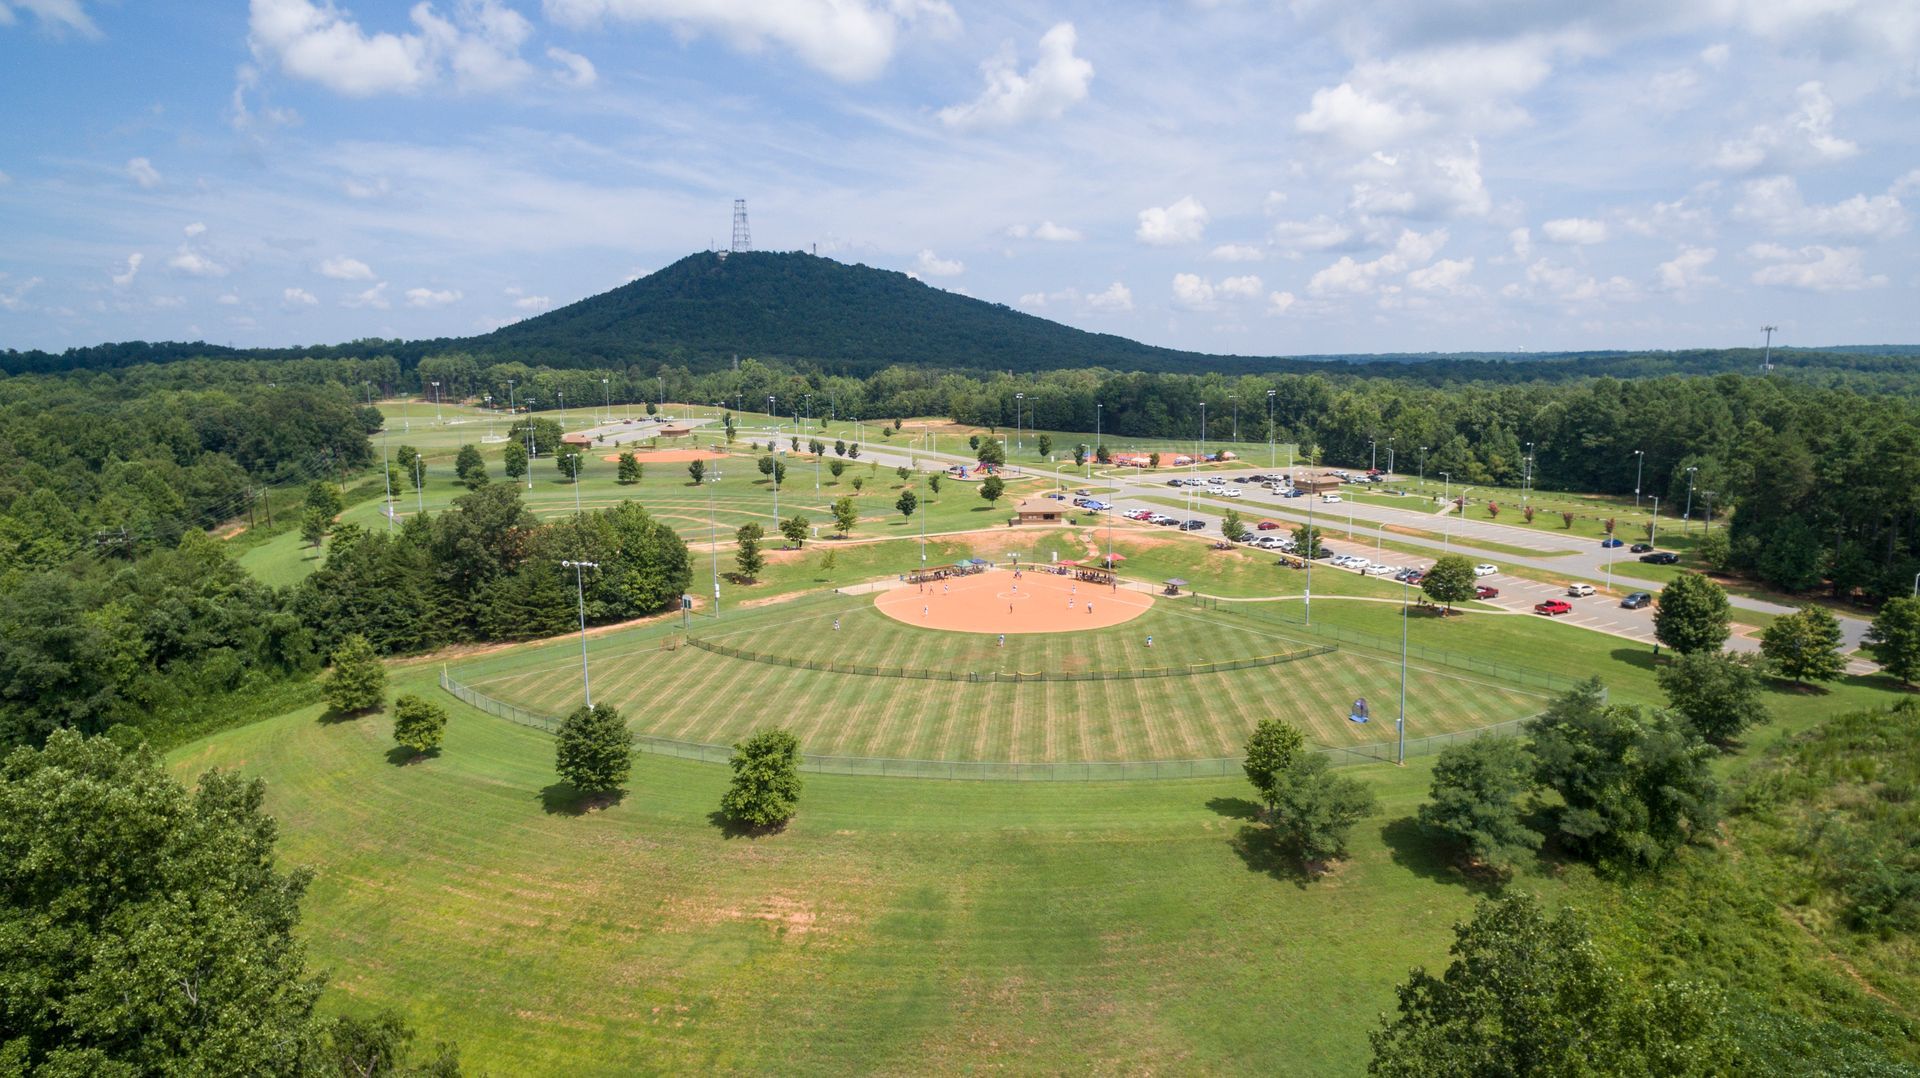 an aerial view of a baseball field with a mountain in the background